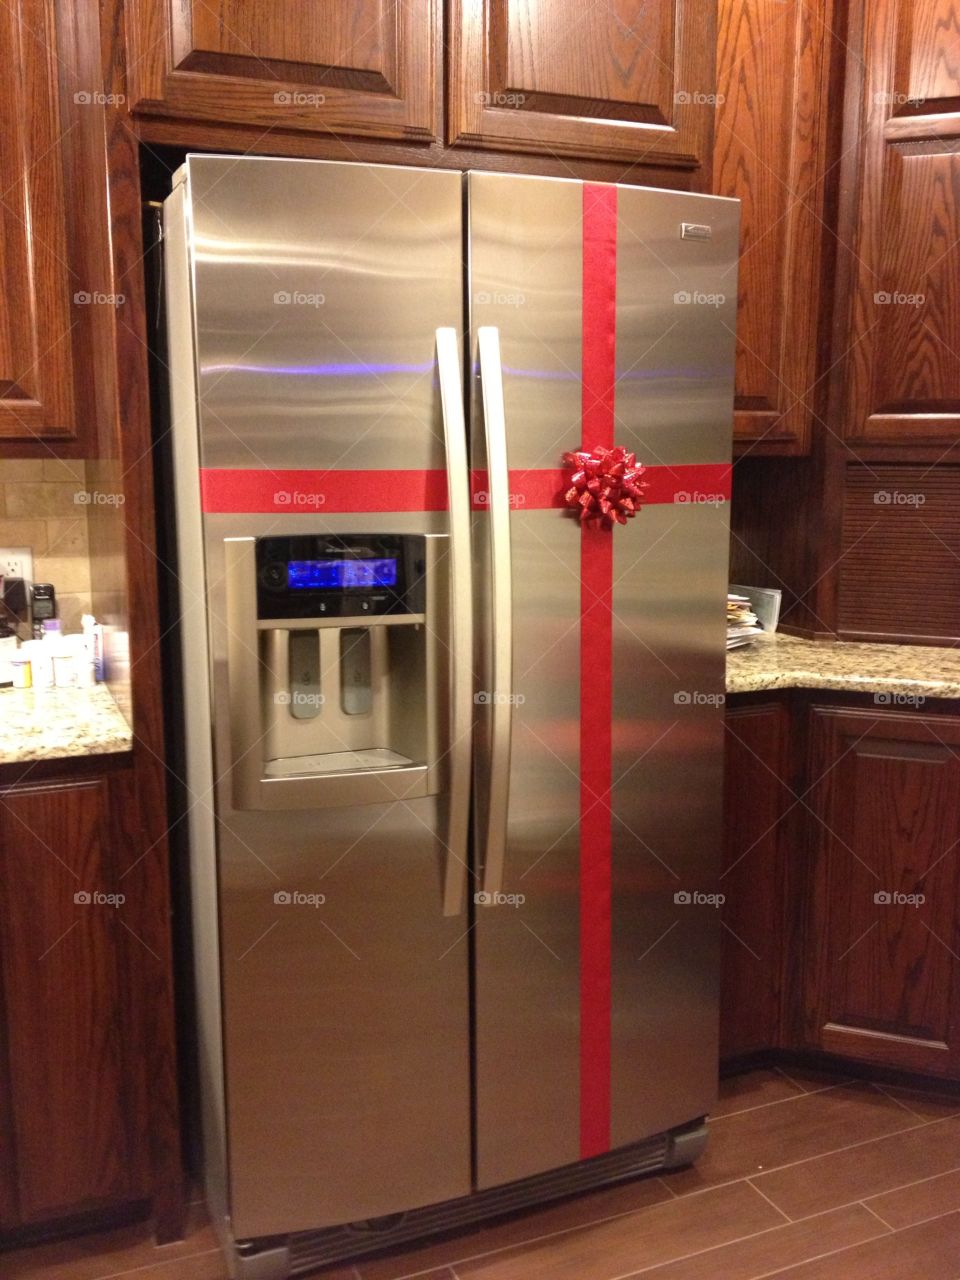 Kitchen Christmas decor. Bow tied around stainless steel refrigerator for Christmas decor.